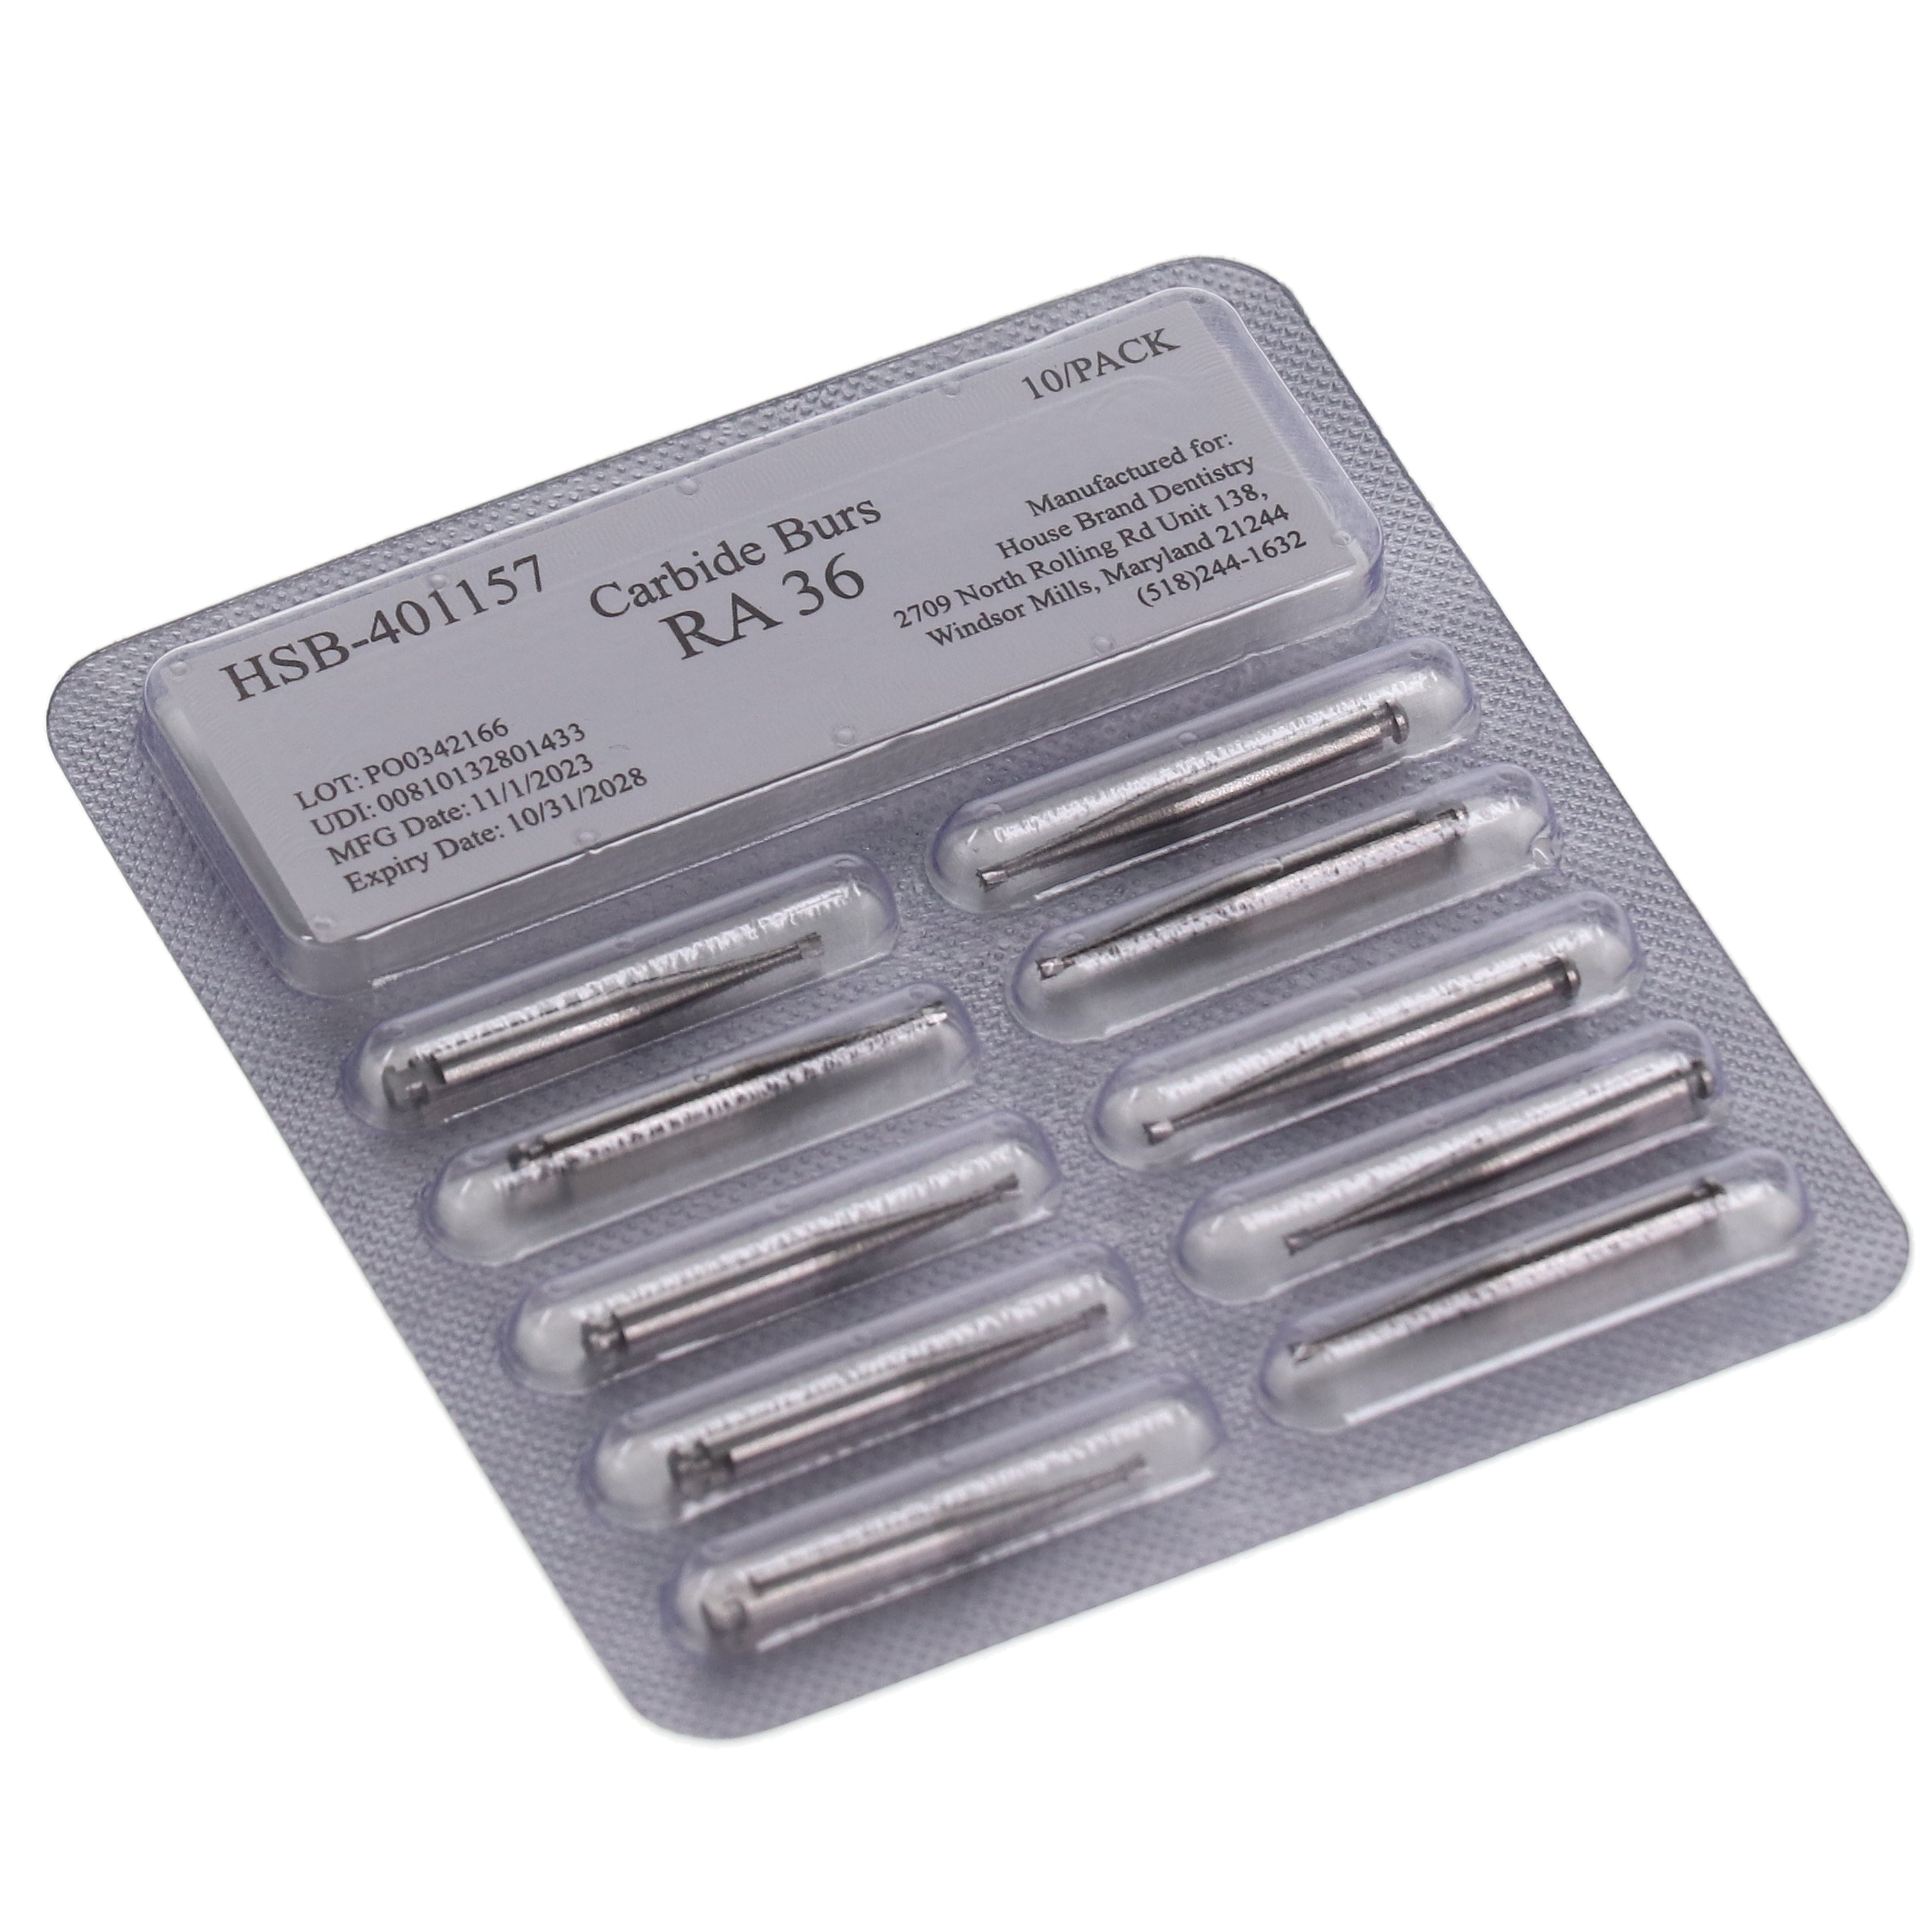 House Brand Dentistry 401157 HSB RA Slow Speed #36 Inverted Cone Carbide Burs 100/Pk